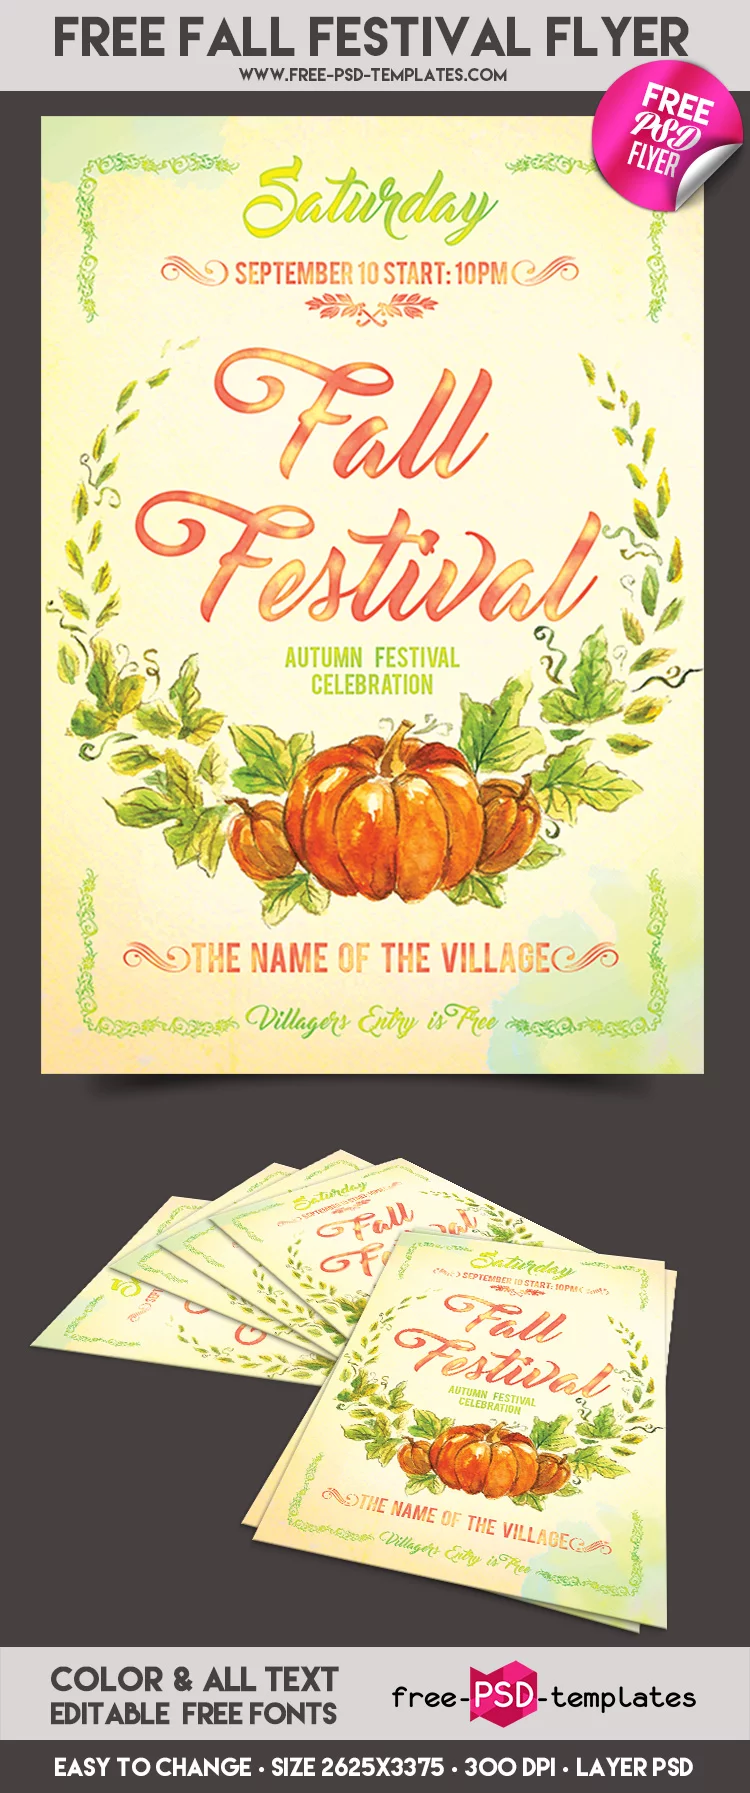 Preview_Fall_Festival_Flyer